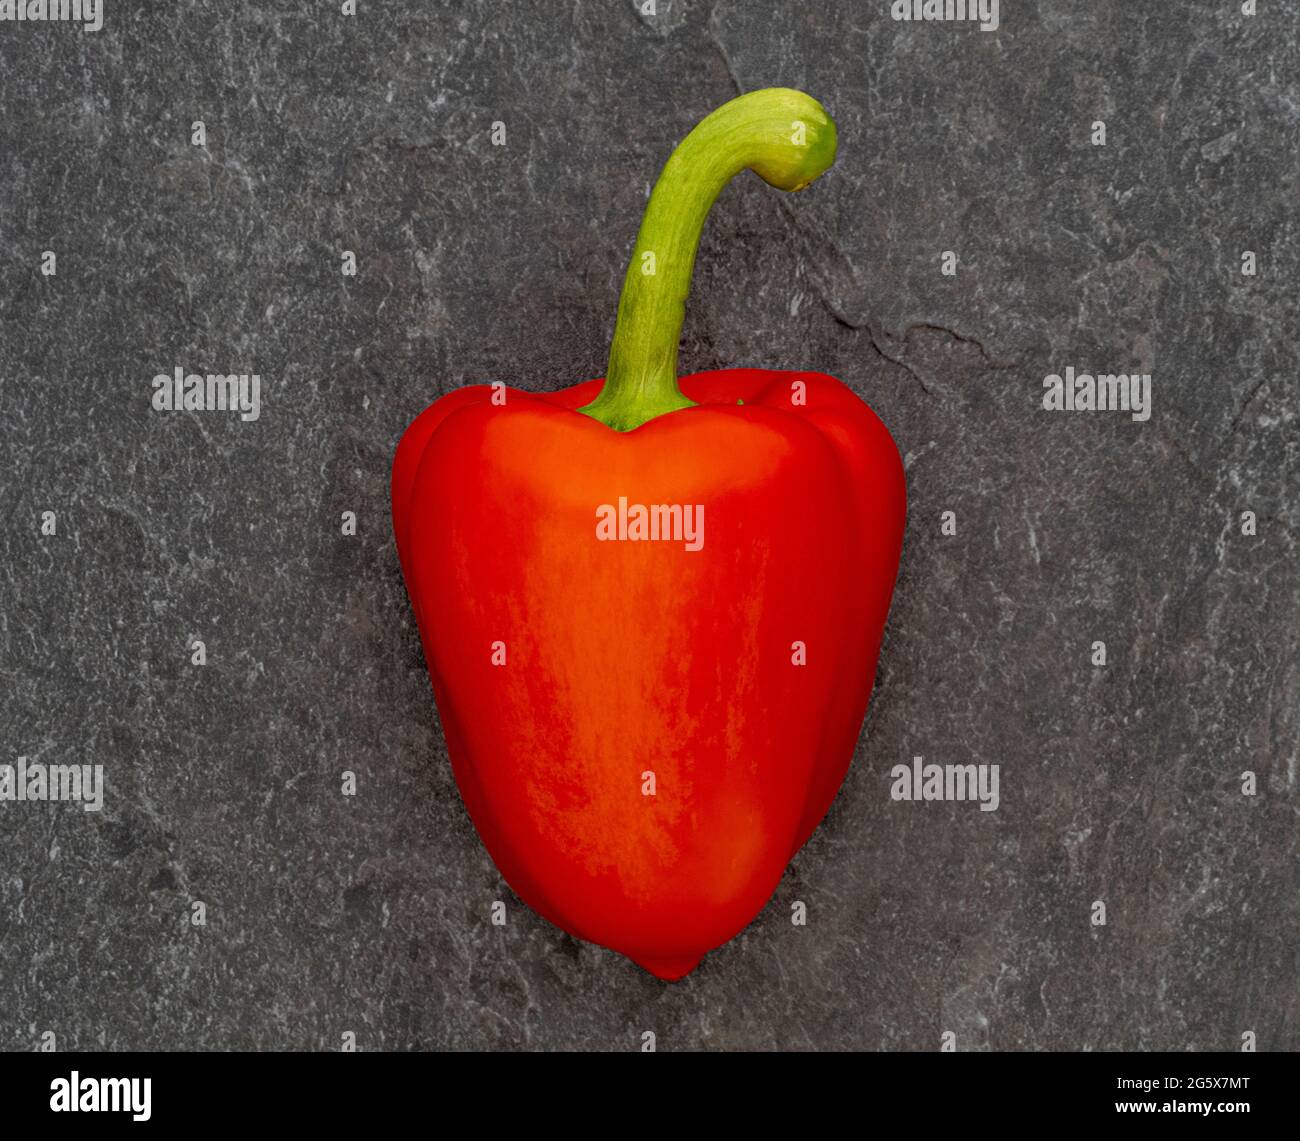 Plan view of a red bell pepper on a grey textured background. Stock Photo